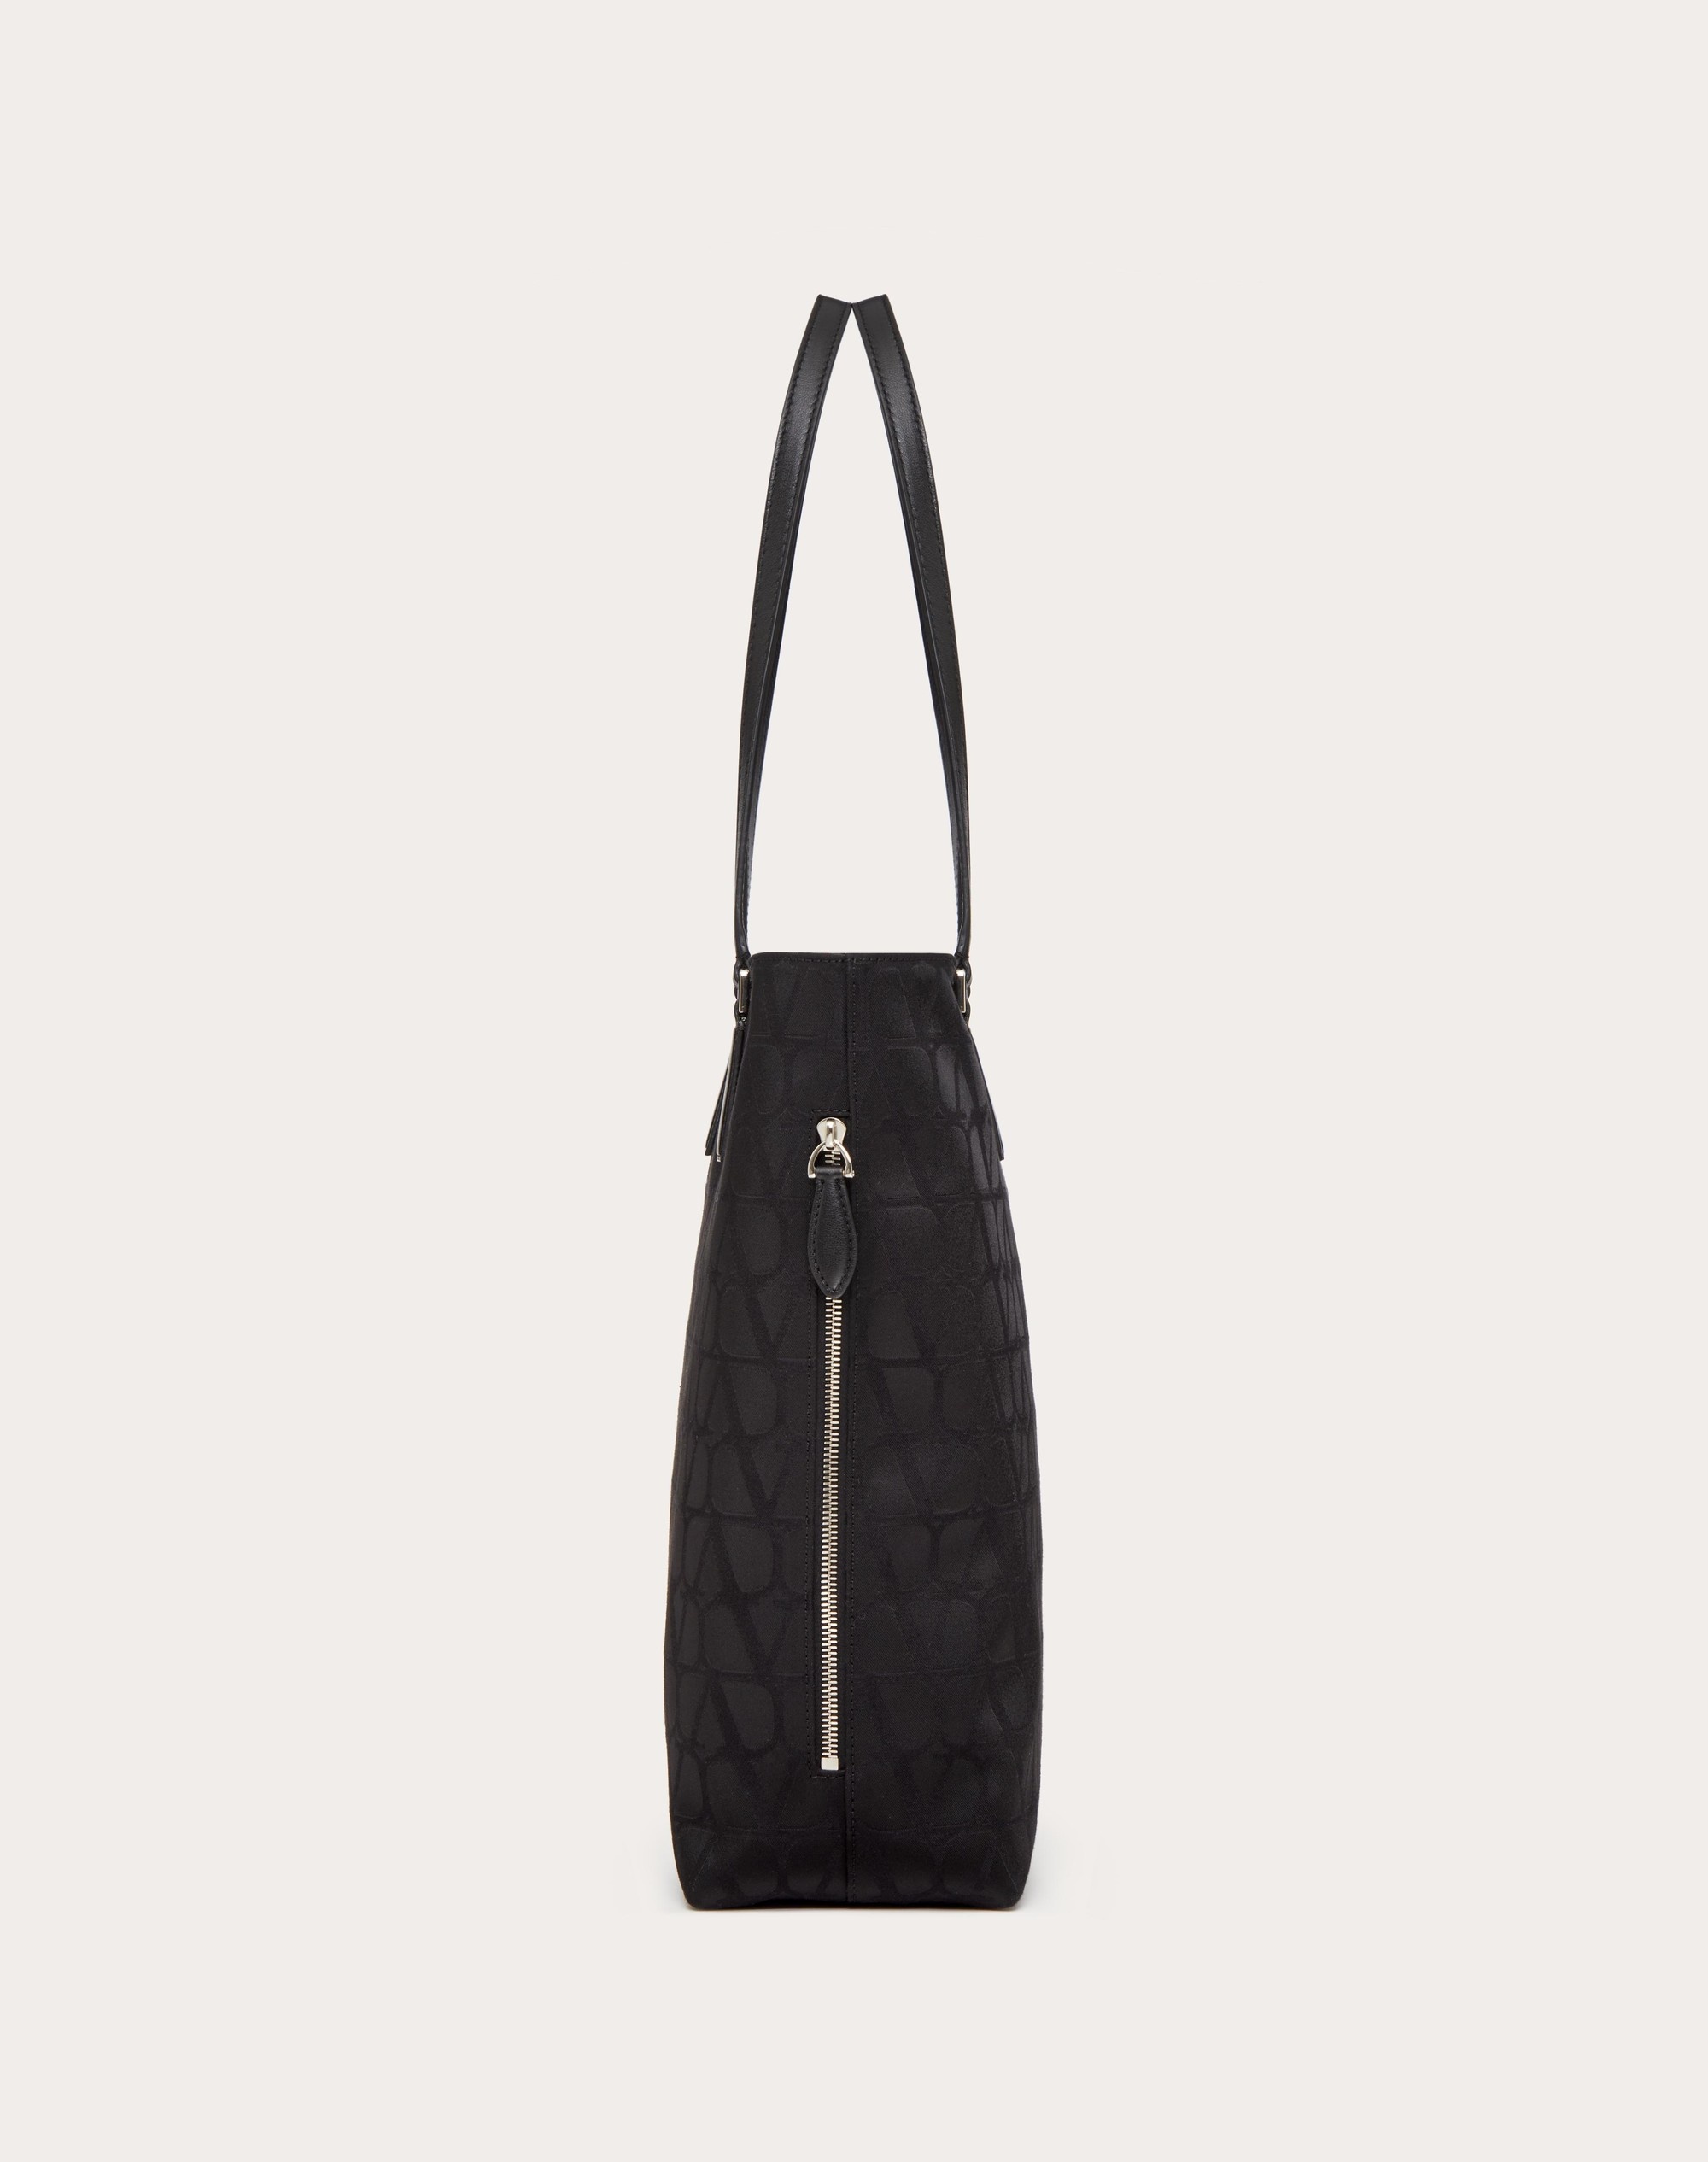 TOILE ICONOGRAPHE SHOPPING BAG IN TECHNICAL FABRIC WITH LEATHER DETAILS - 5